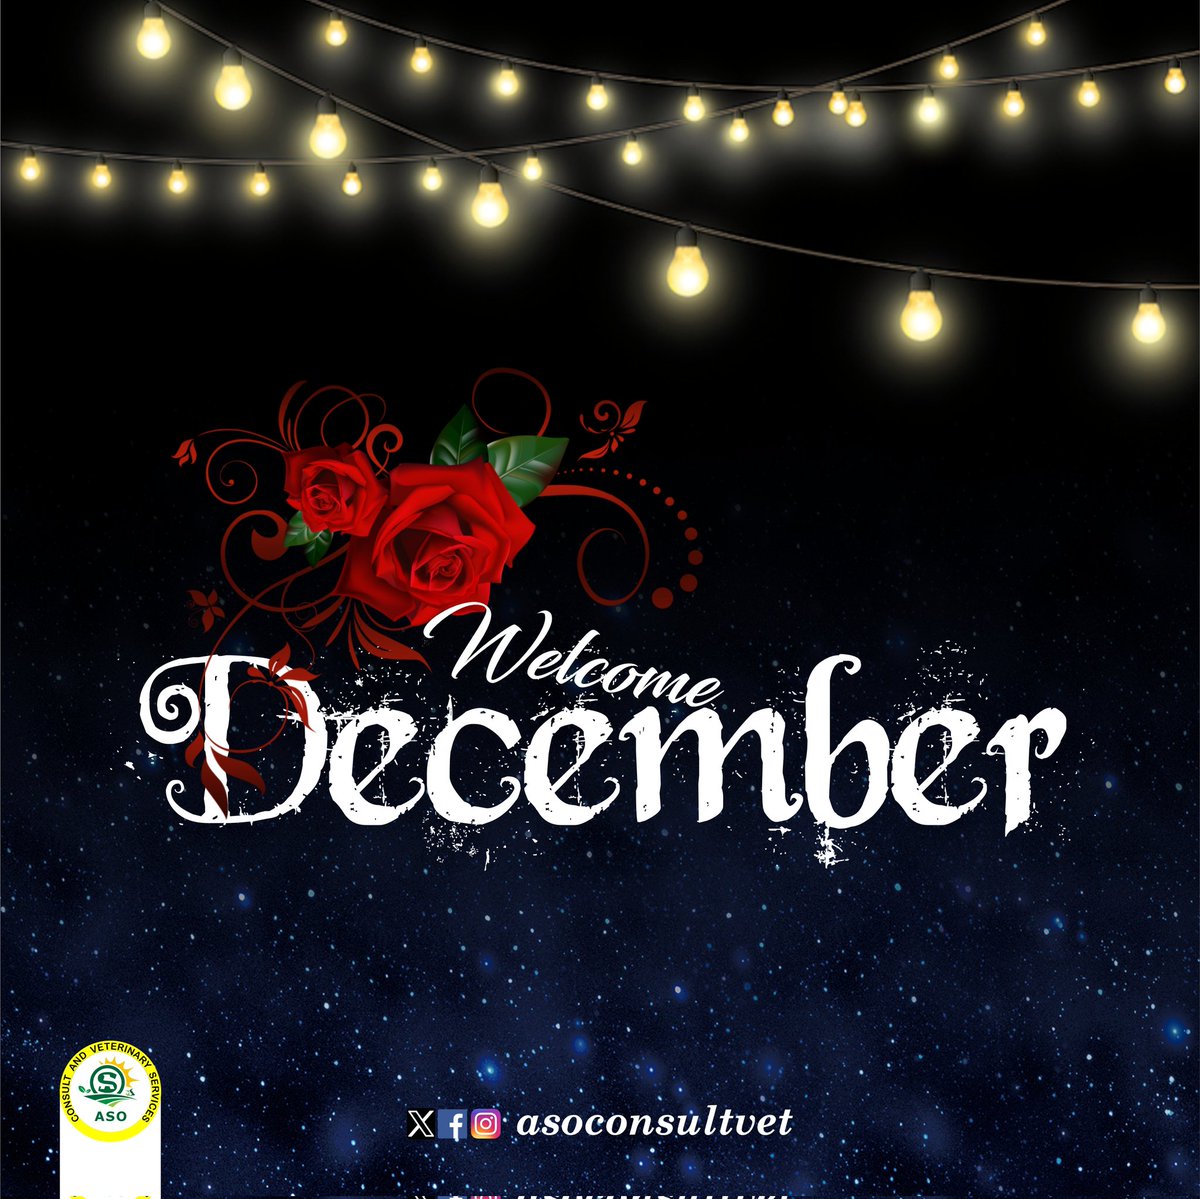 We finally made it to the last month of the year...May happiness and success be our portion this month...Happy new month...
#Animal #asoconsultvet #agriculture #livestock #farming #agricbusiness #poultry  #NewMonth #December2023 #HappyNewMonth